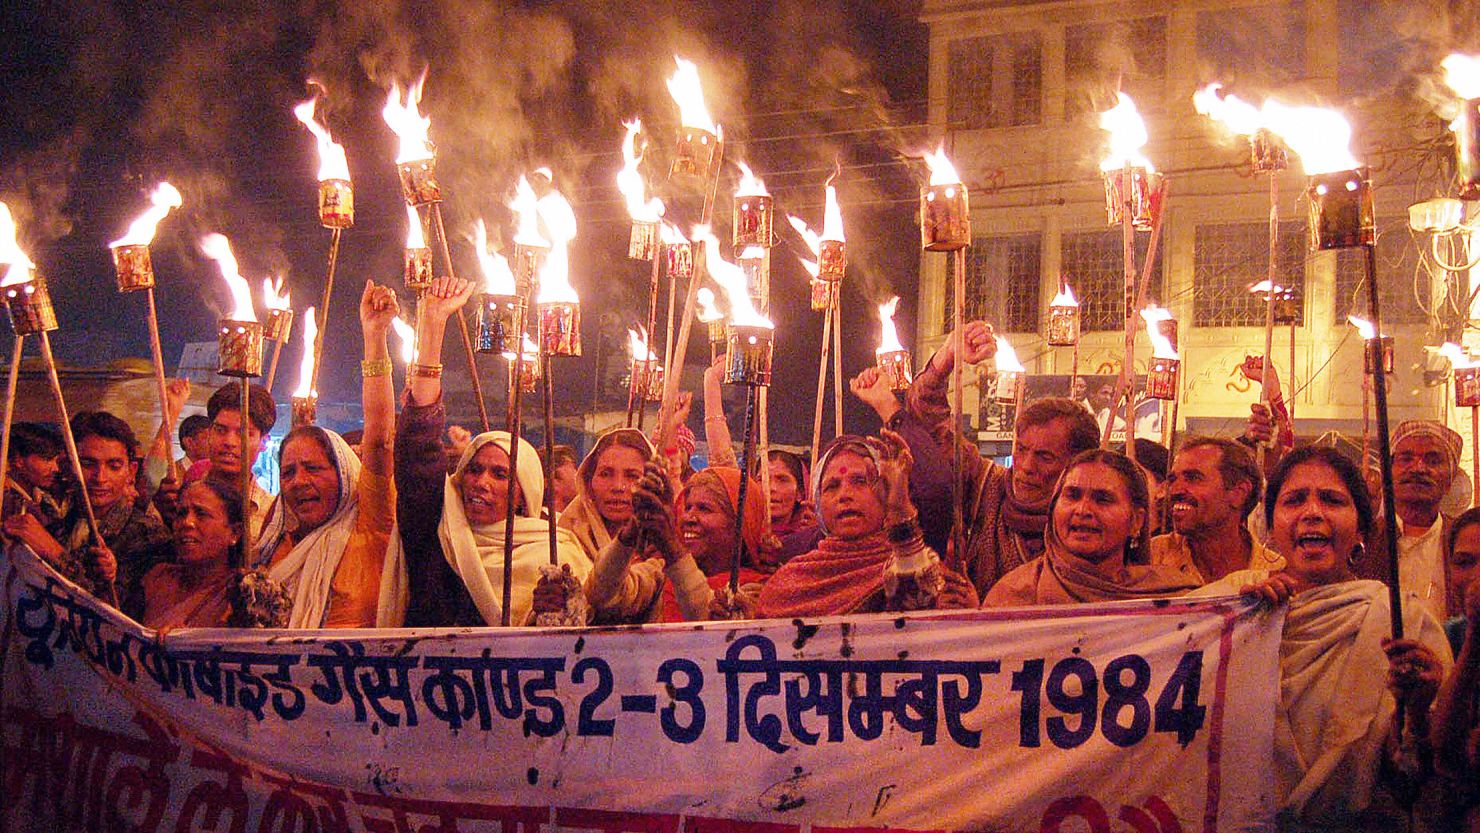 The Bhopal disaster is the worst industrial tragedy in India's history. Here, protestors demonstrate in 2006.